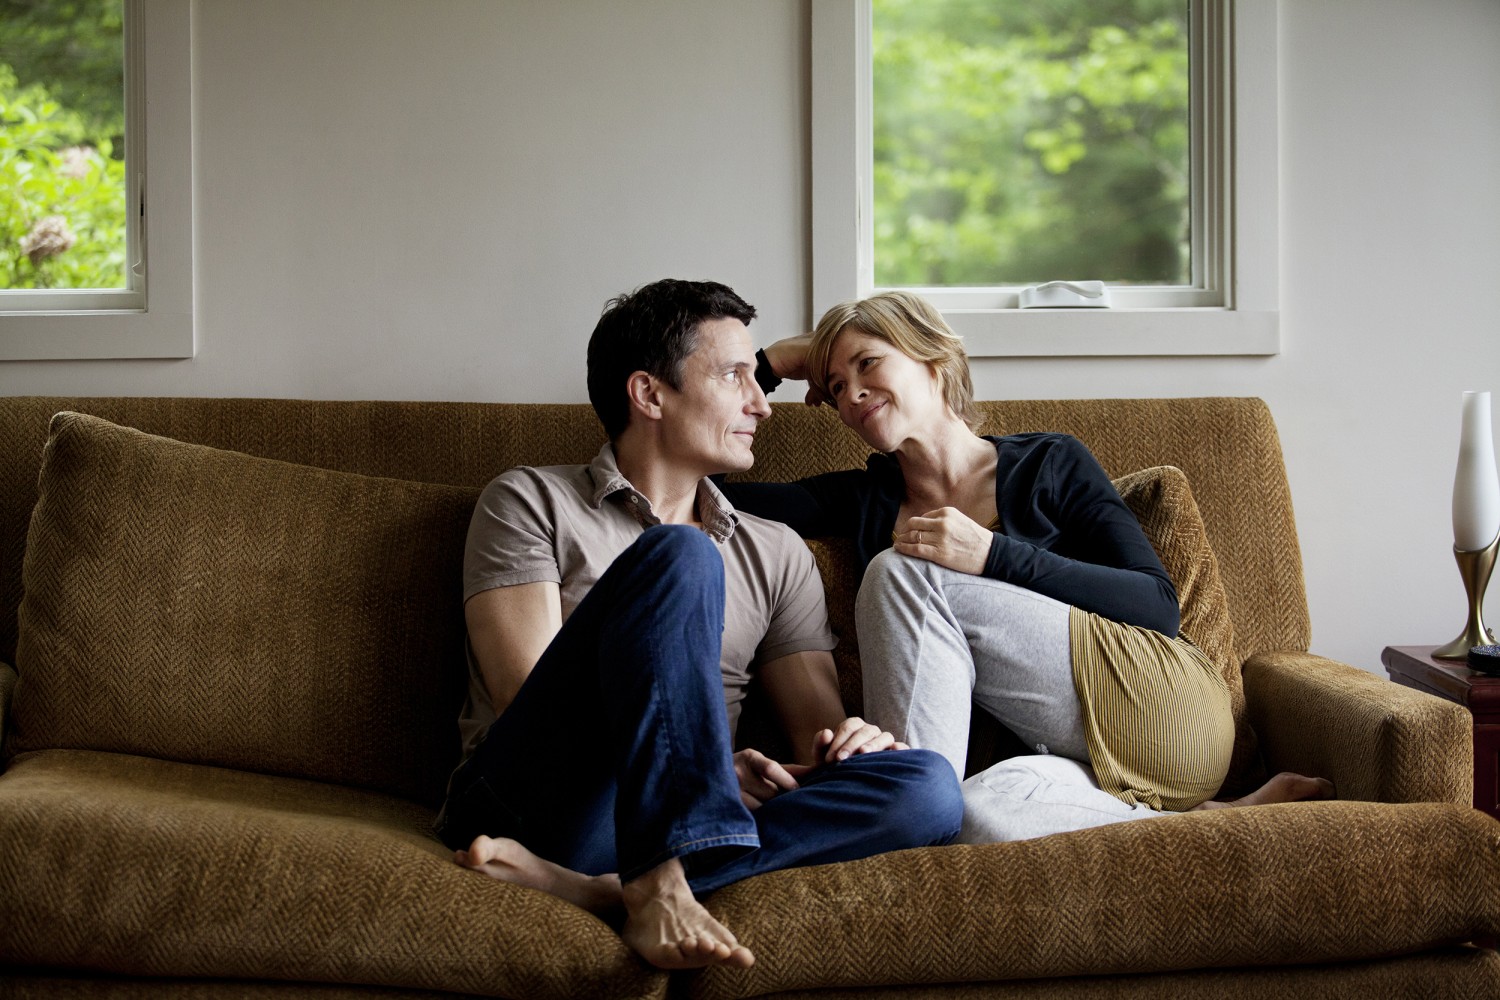 7 things to say to your spouse to deepen your connection image